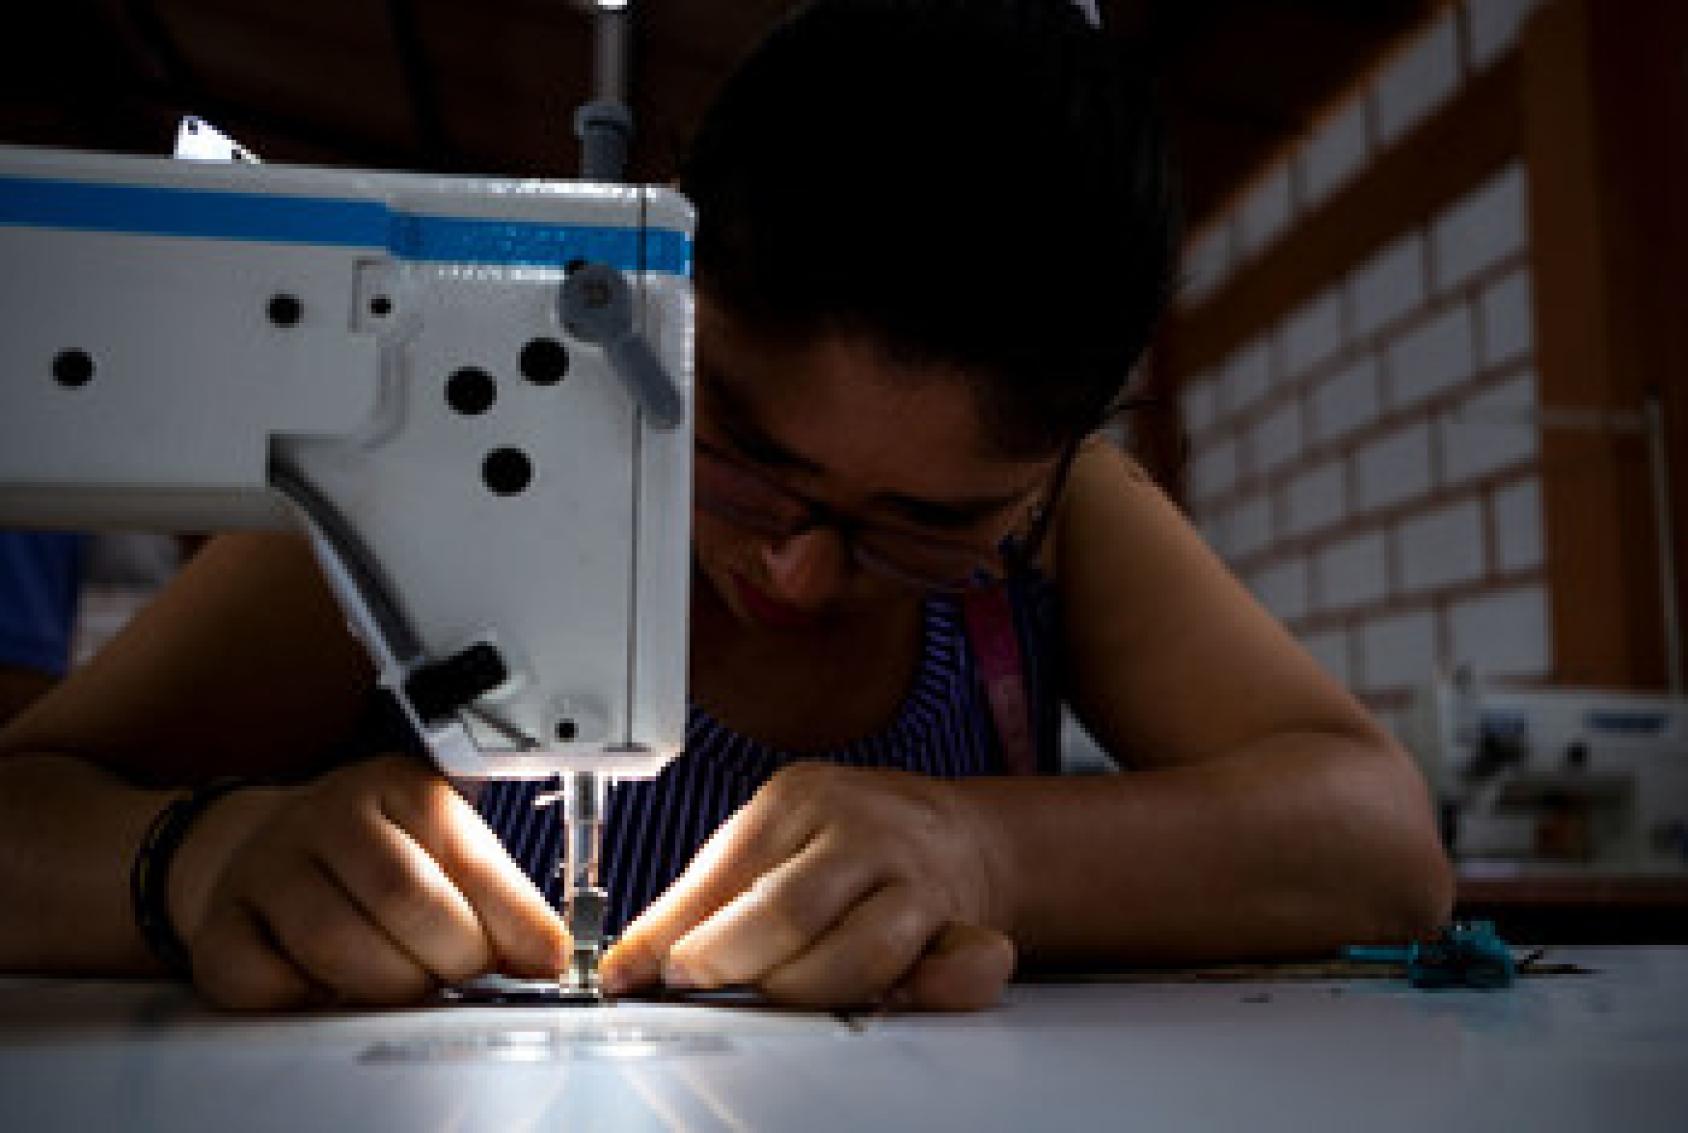 A woman closely watches as her fingers pitch the fabric she runs through the sewing machine.